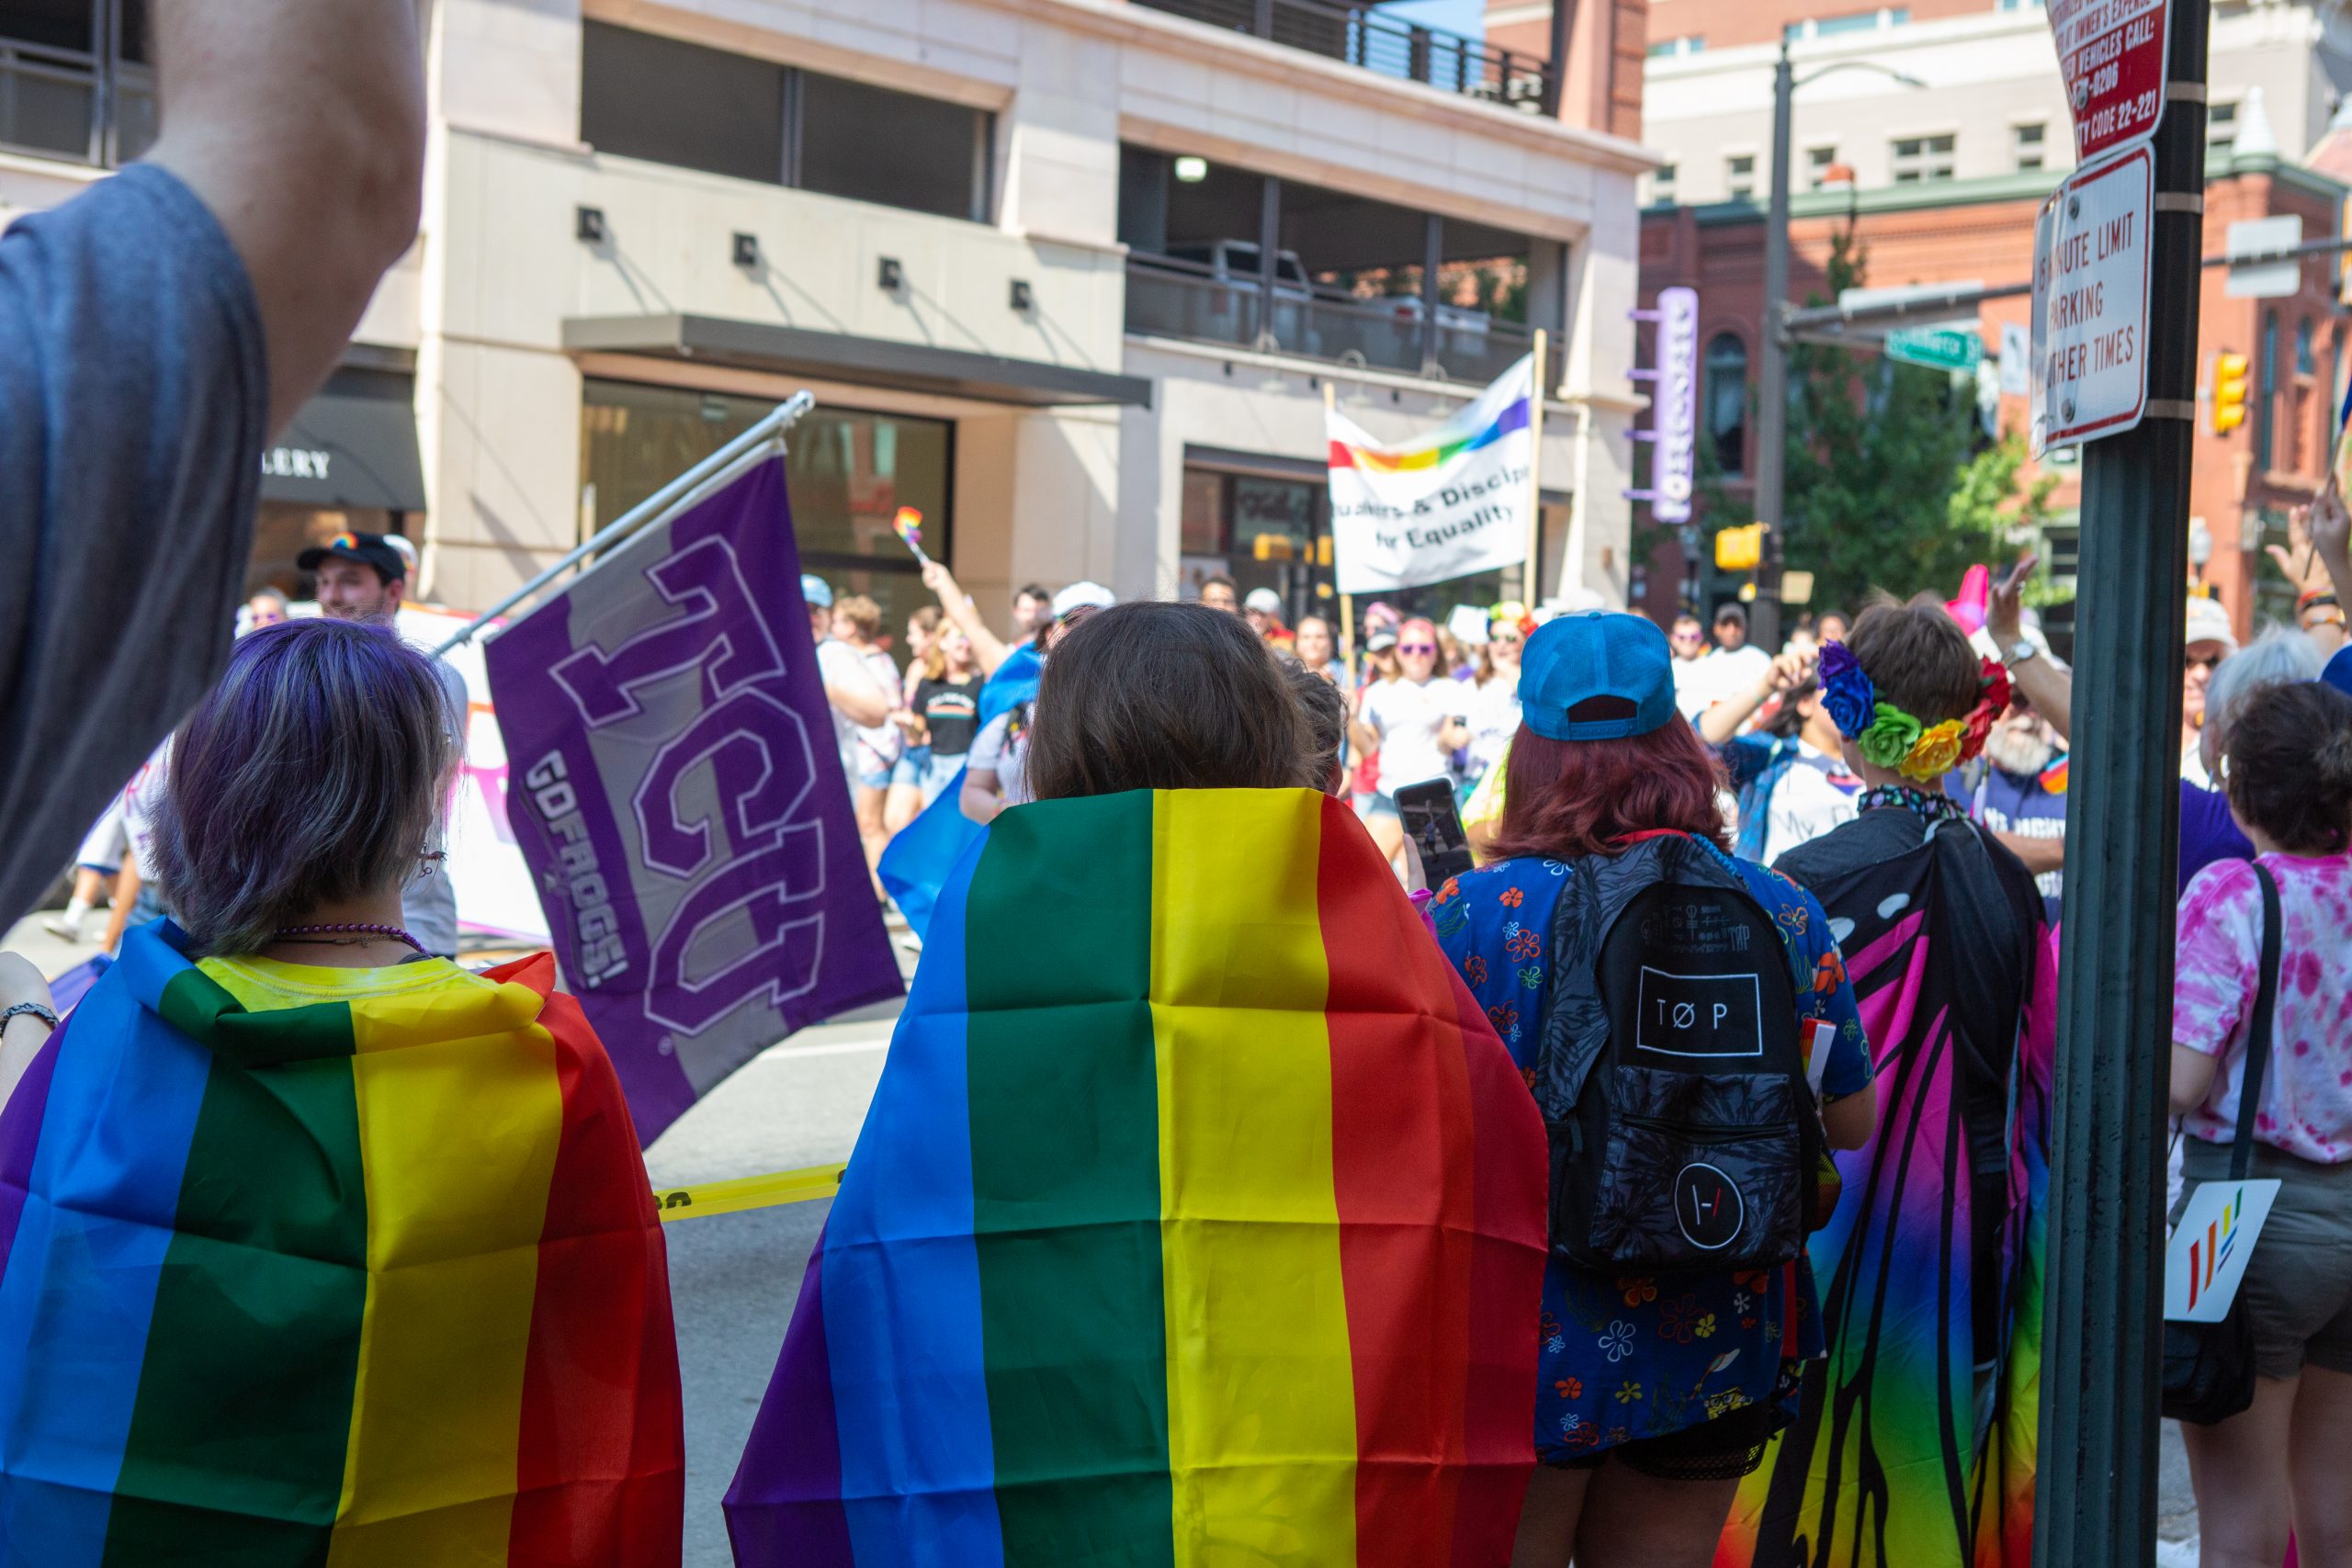 TCU's Spectrum student group participated in the Tarrant County Pride Parade for the first time. Photo by Kyle Cartwright, October 5, 2019